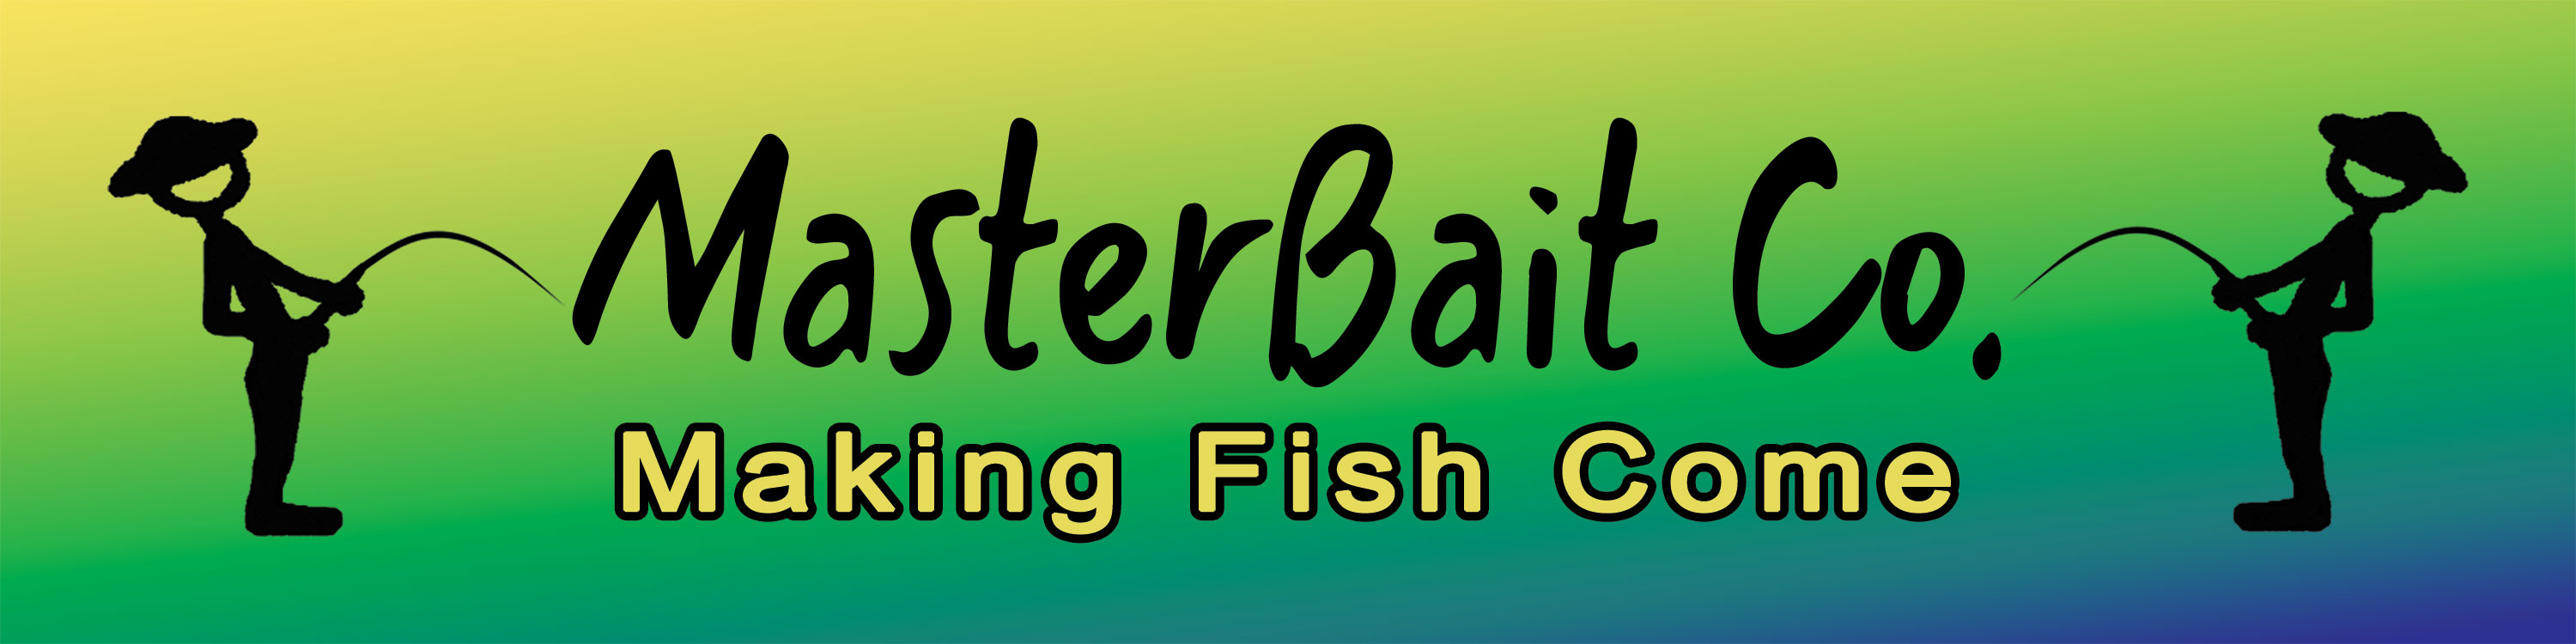 Hand poured fishing lures by MasterBait Co.